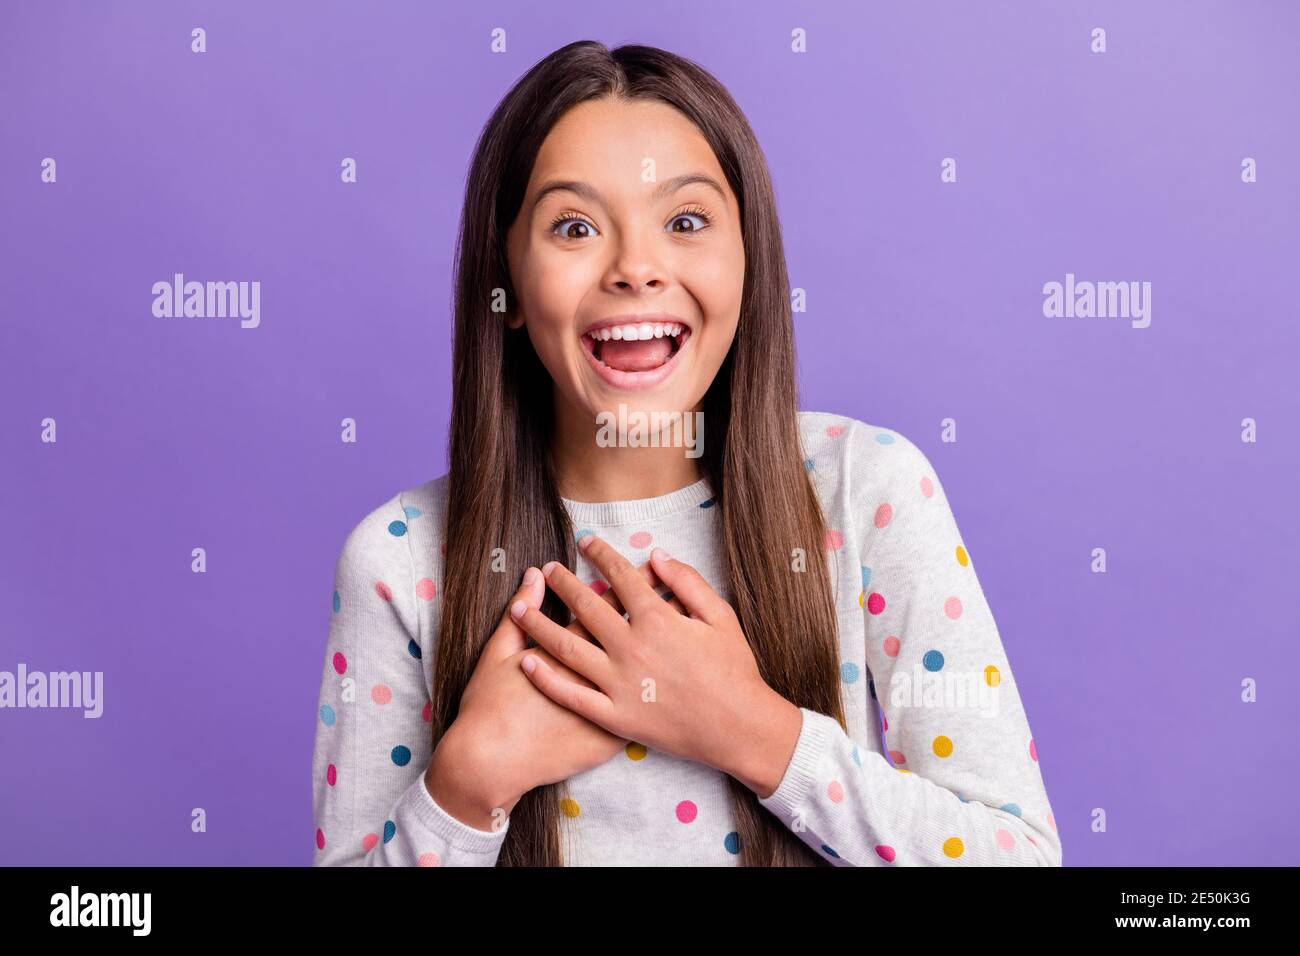 Photo portrait of laughing girl touching chest with hands isolated on vivid violet colored background Stock Photo